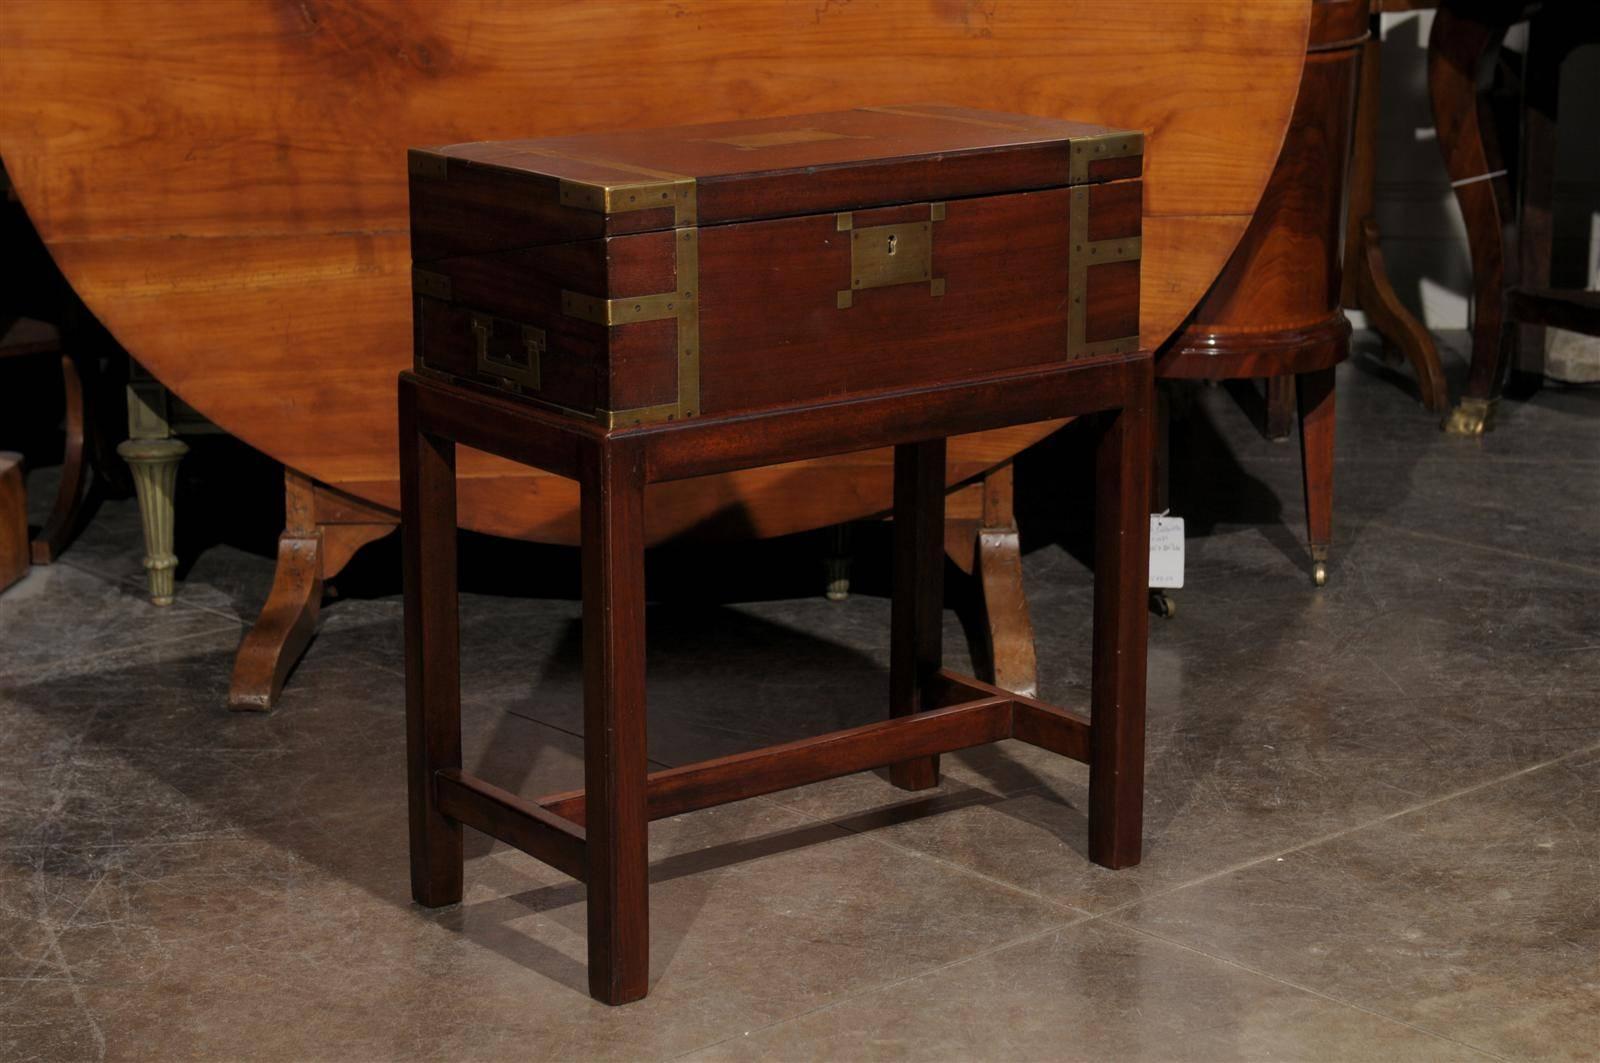 An English lap desk box on custom-made stand from the mid-19th century. This English box on stand is in fact a lap desk, featuring a rectangular box accented with brass accents. The box has been mounted on a mahogany base with straight legs and